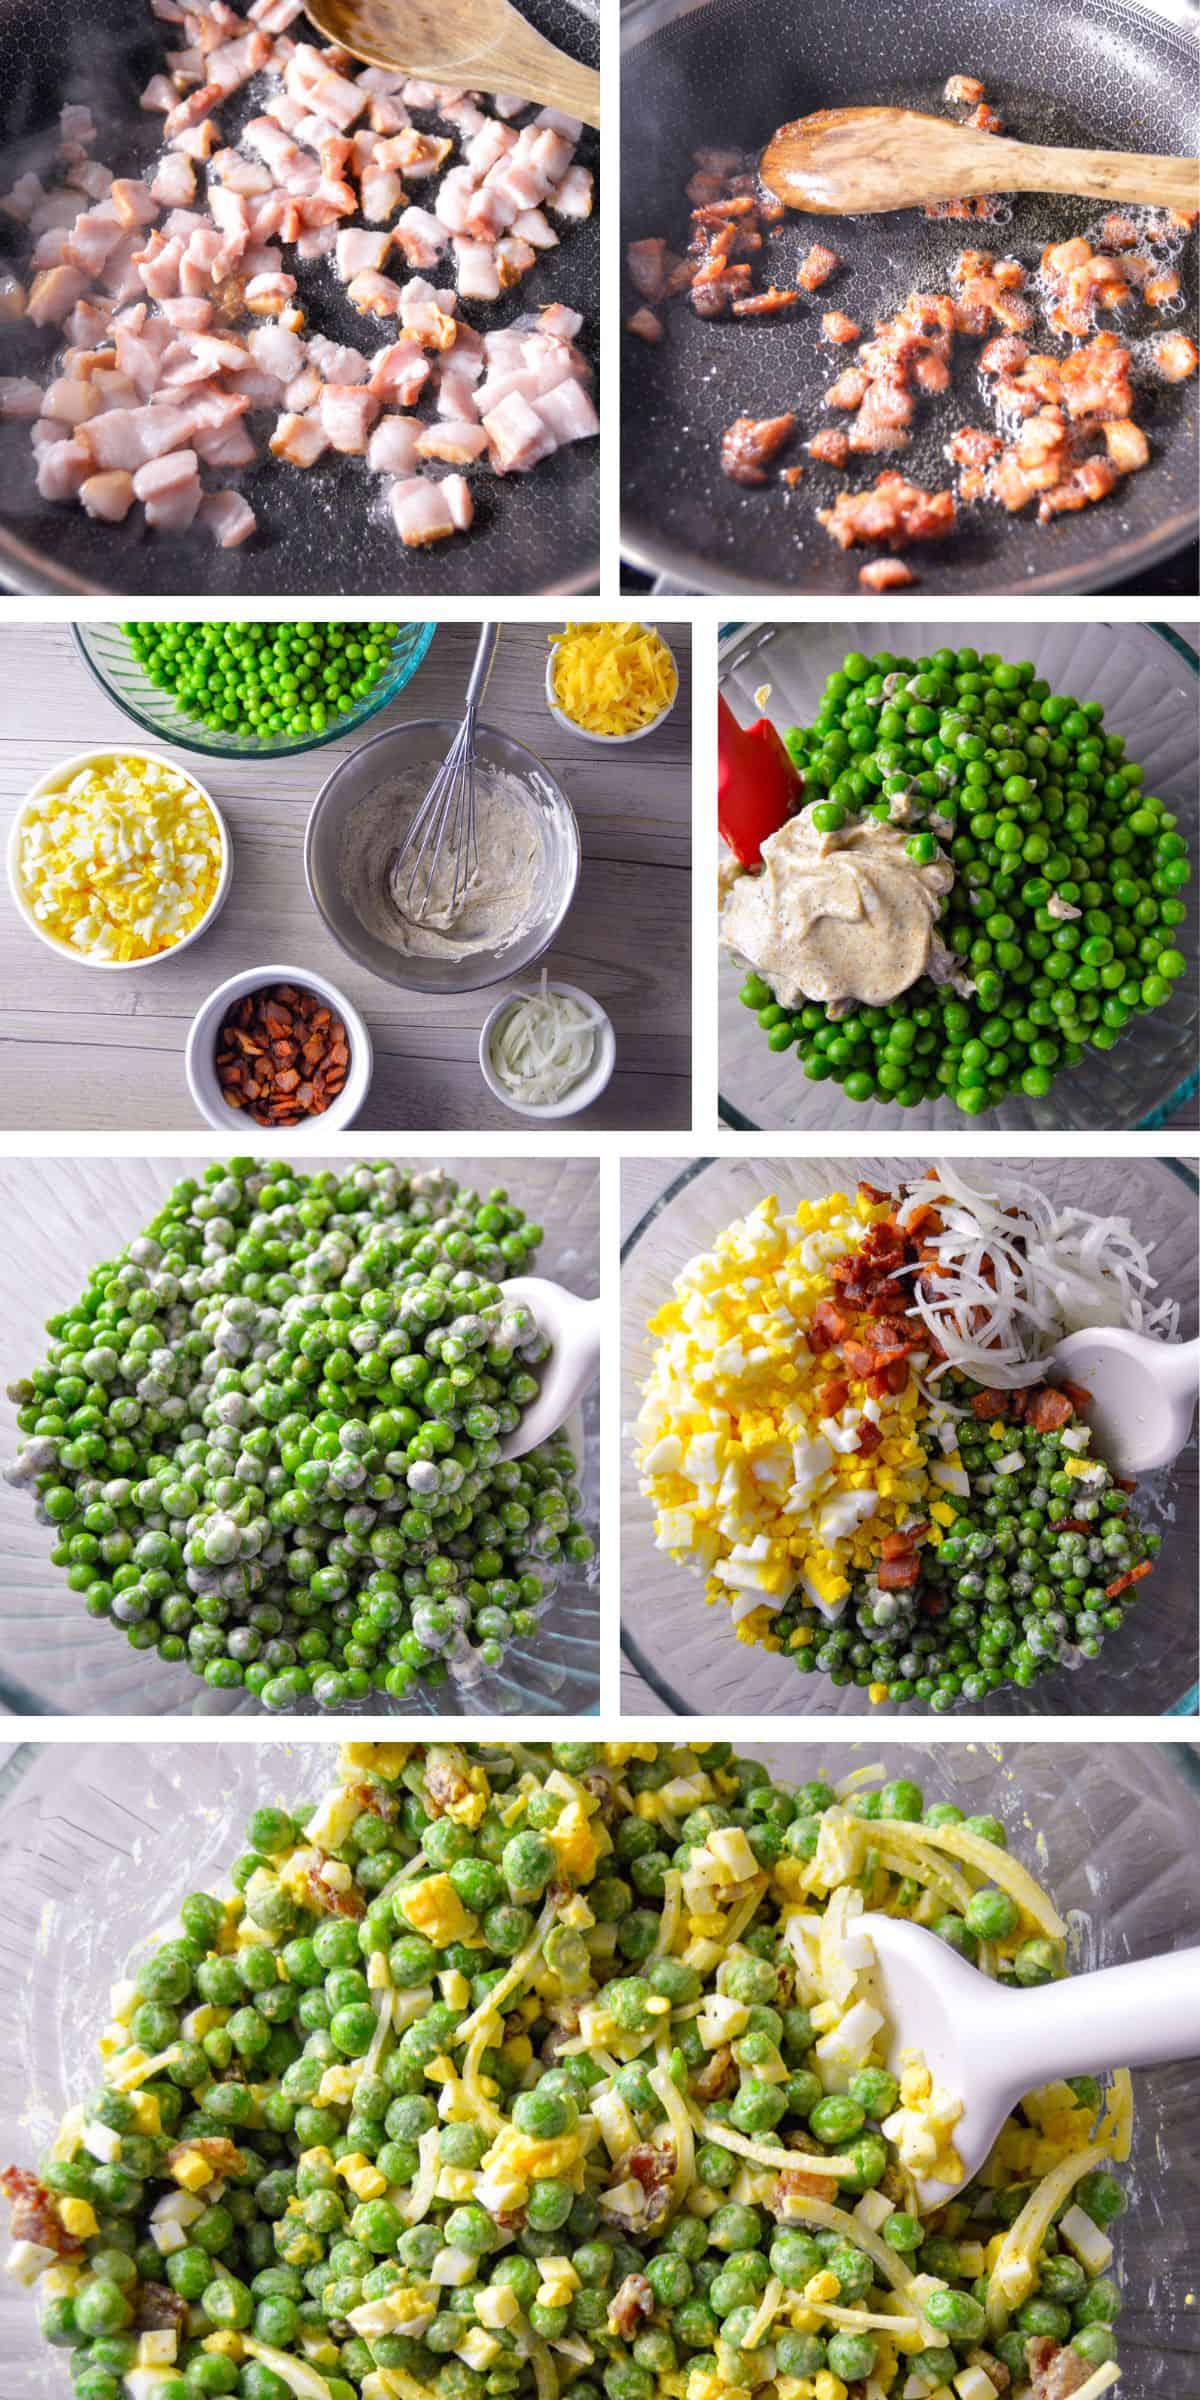 Making Pea salad collage with 7 pictures from cooking bacon to final bowl of salad